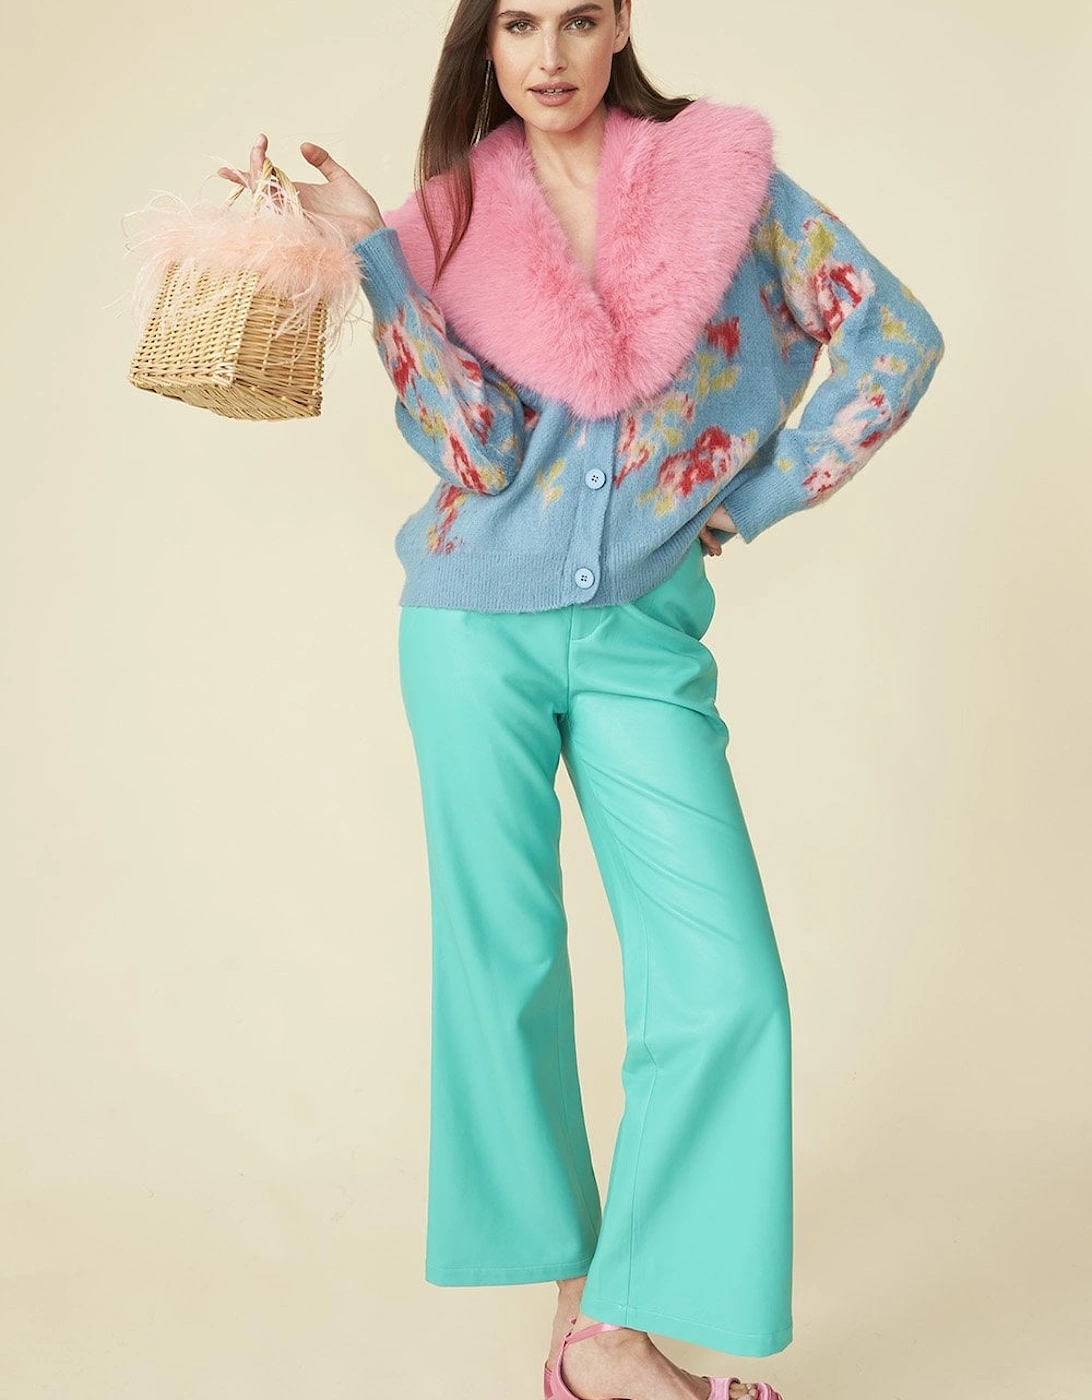 Blue Banana Peel Floral Cardigan with Pink Faux Fur Collar